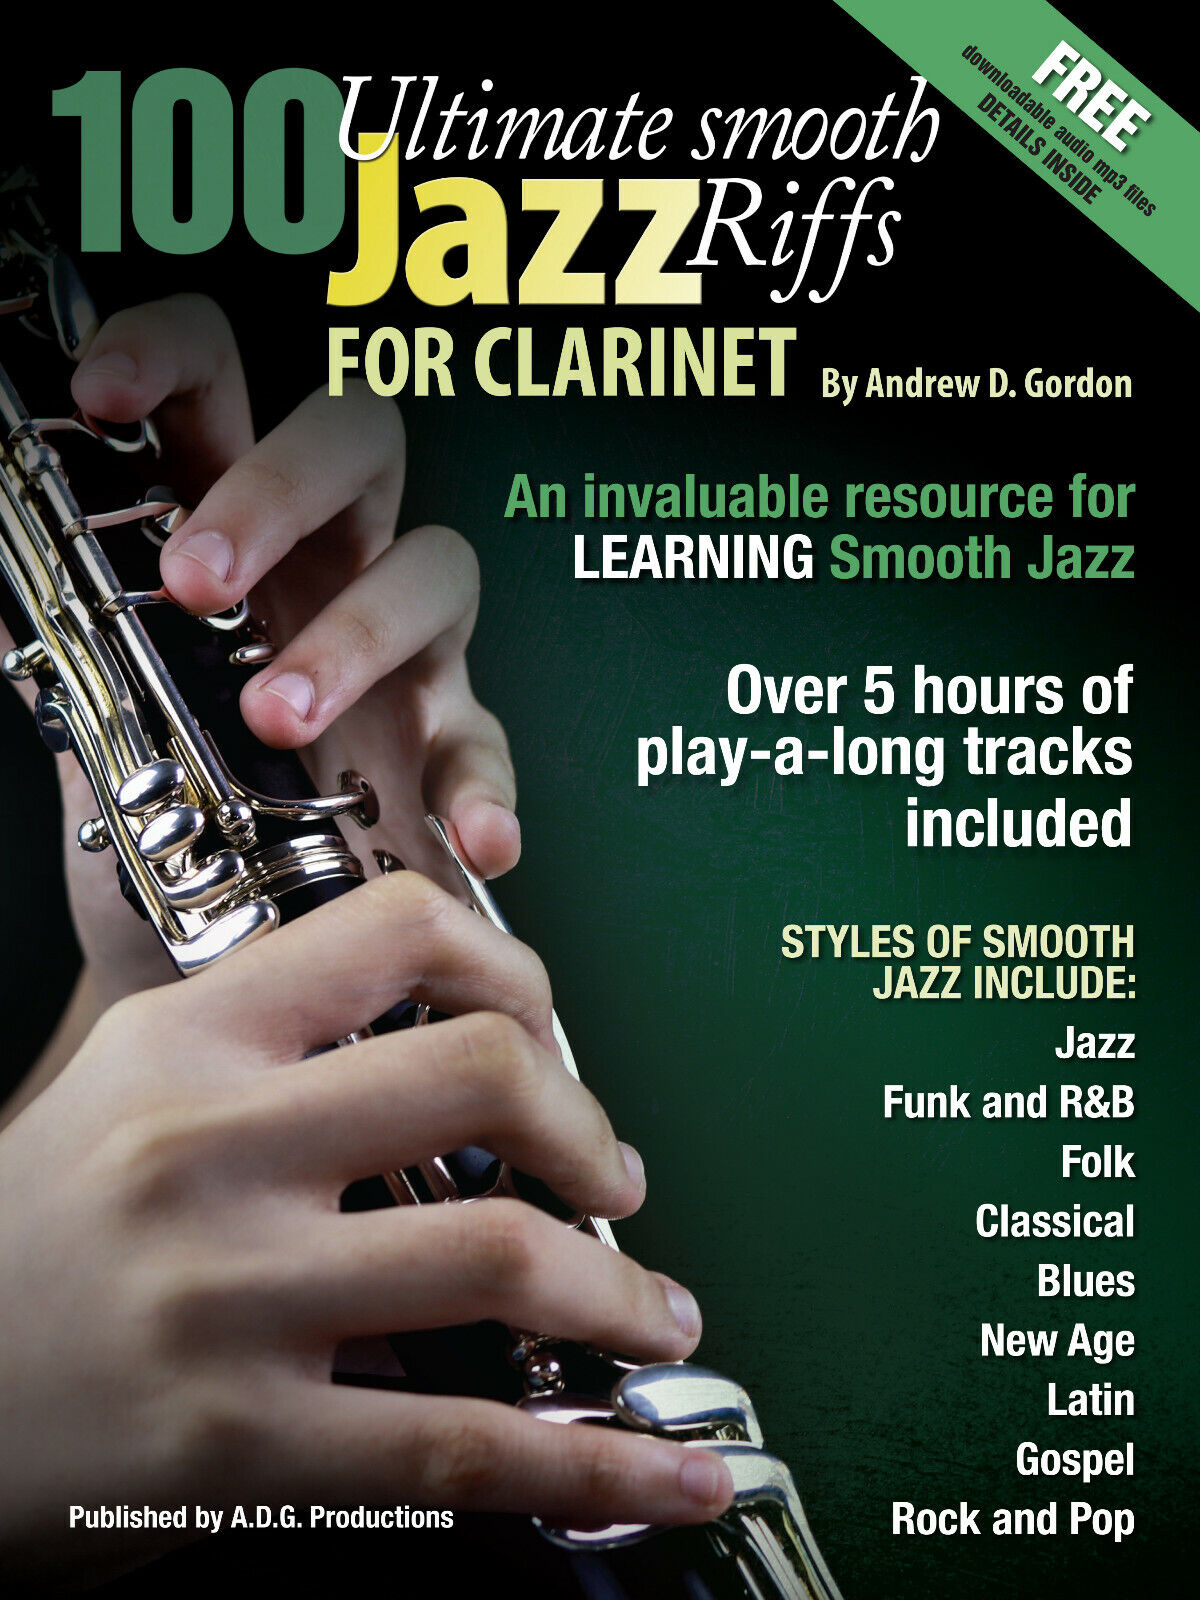 100 Ultimate Smooth Jazz Grooves for Clarinet Book/mp3 files 